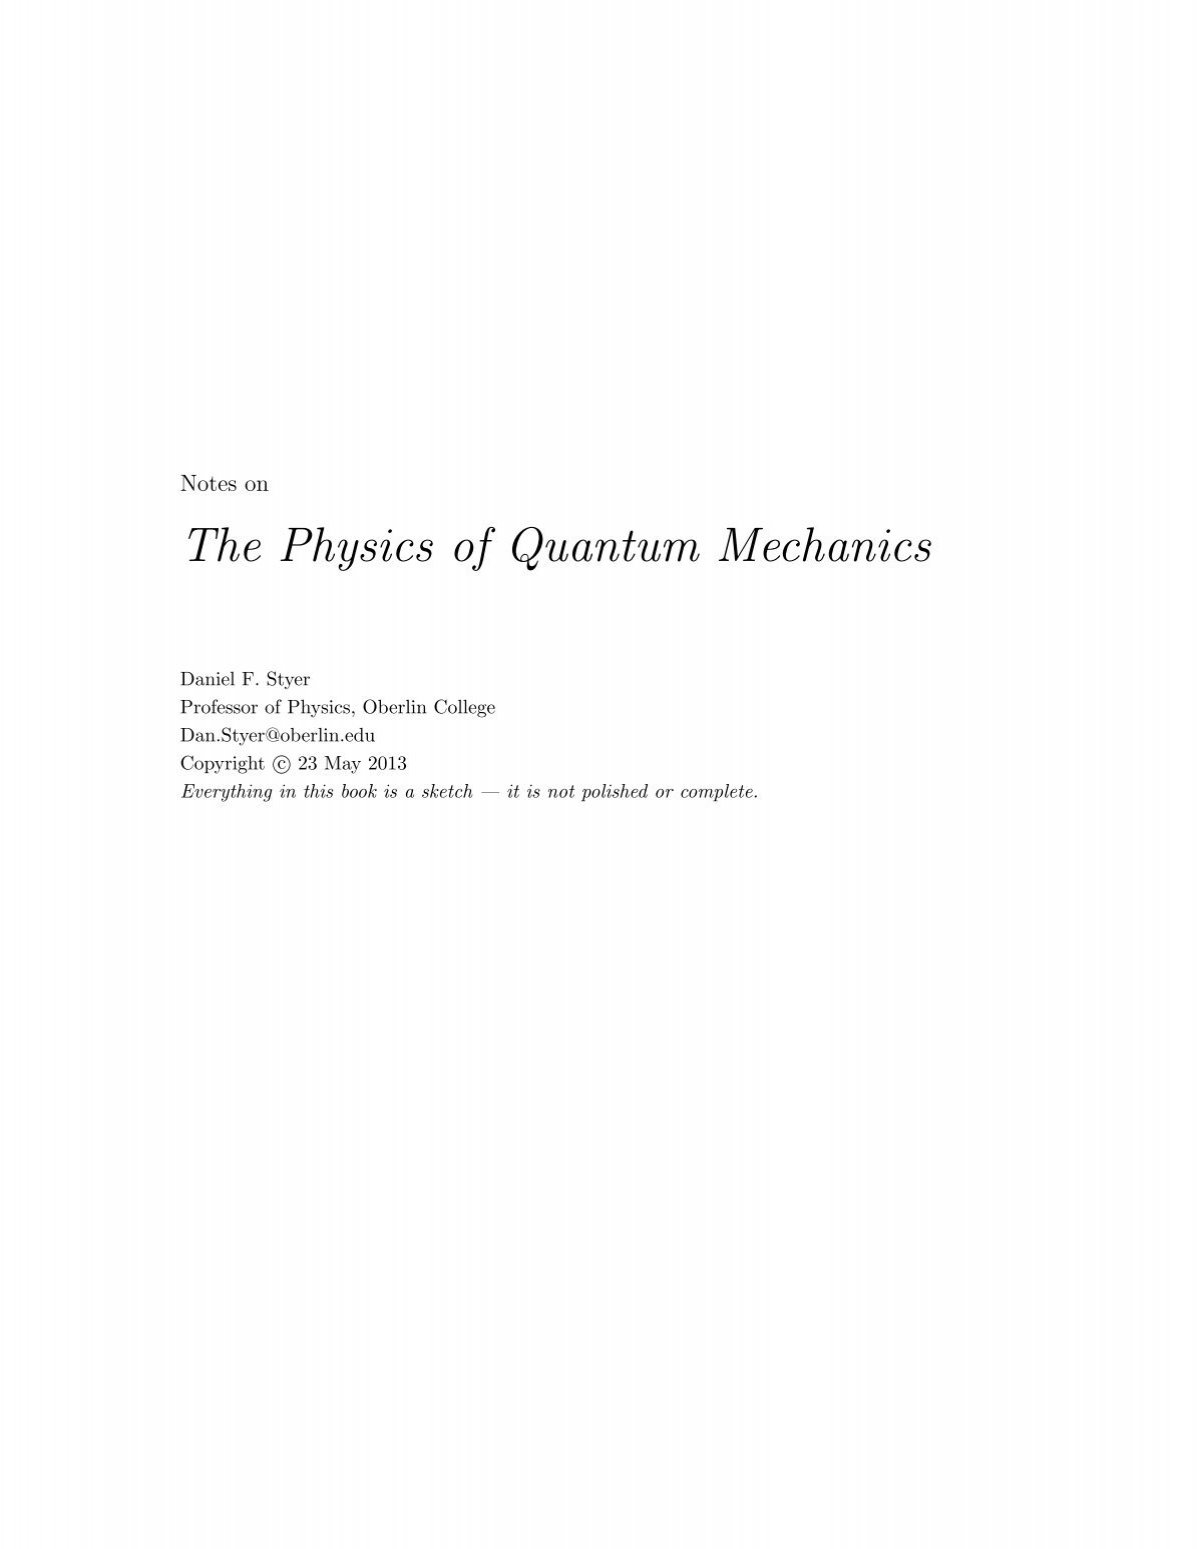 Quantum Theory: A Very Short Introduction by John Polkinghorne by